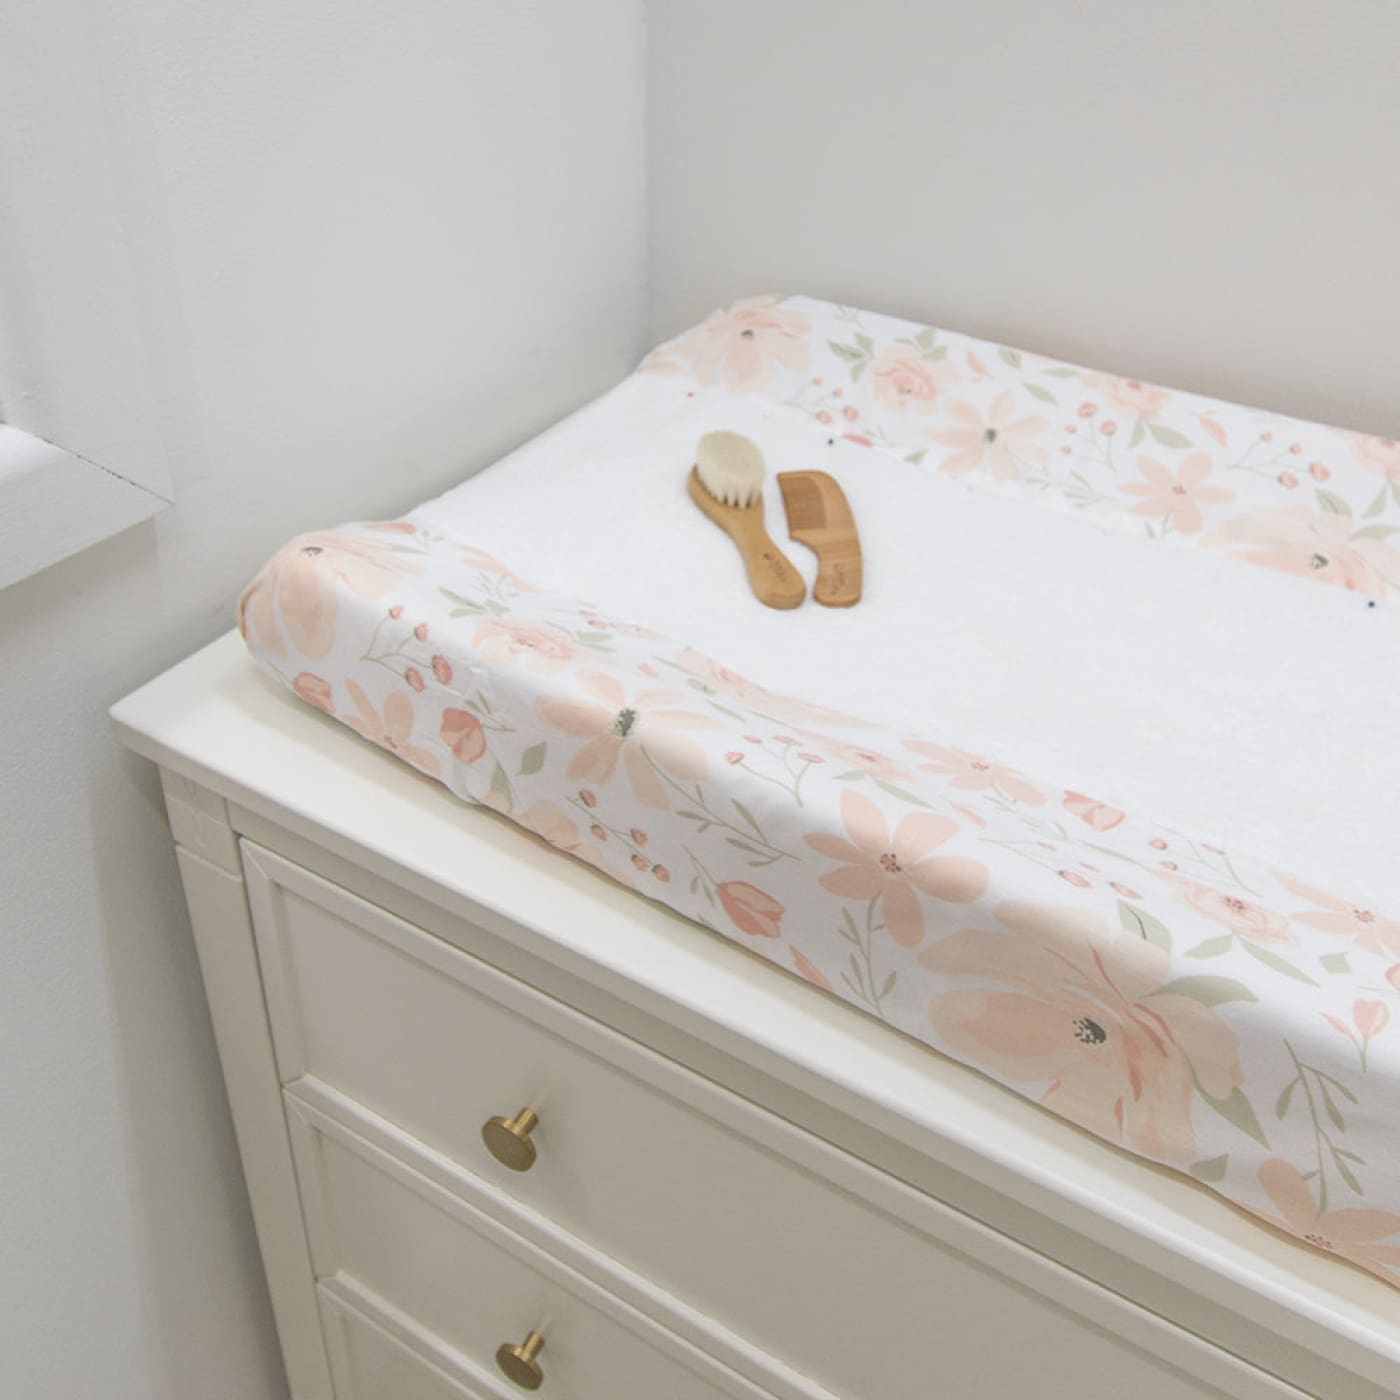 Lolli Living Change pad cover - Meadow Floral - Meadow - BATHTIME & CHANGING - CHANGE MATS/COVERS